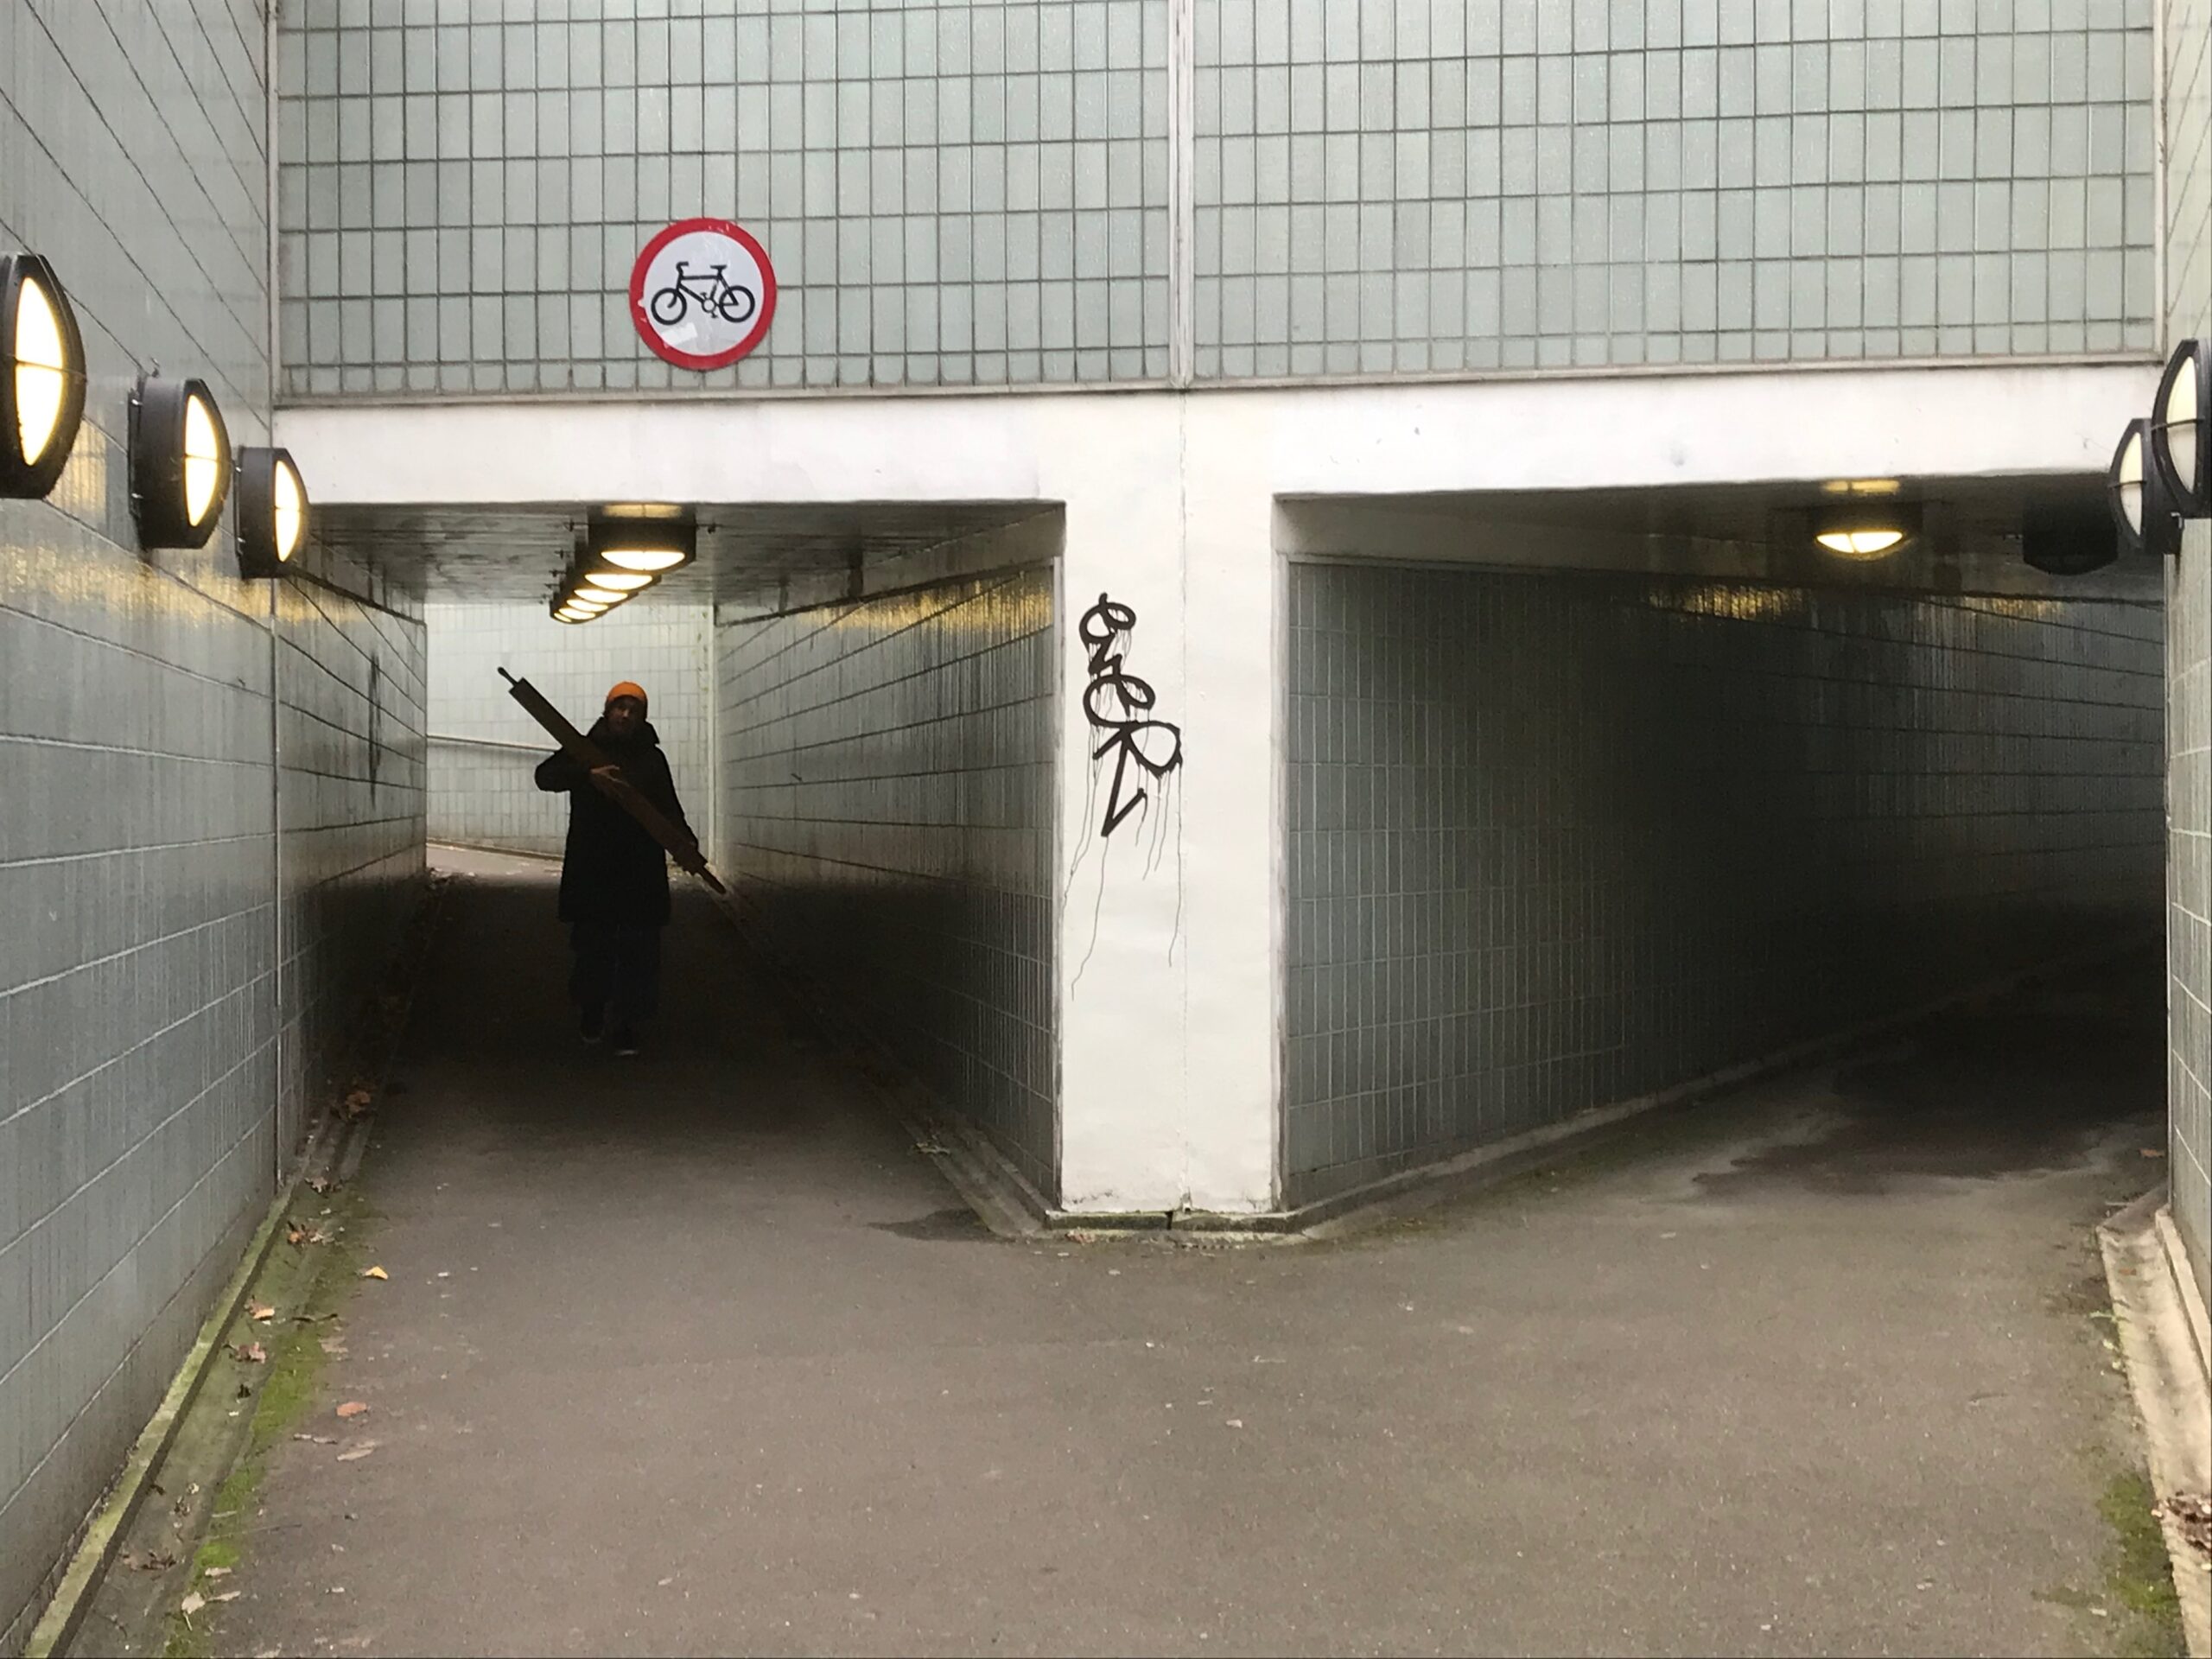 Lost Chord Underpass